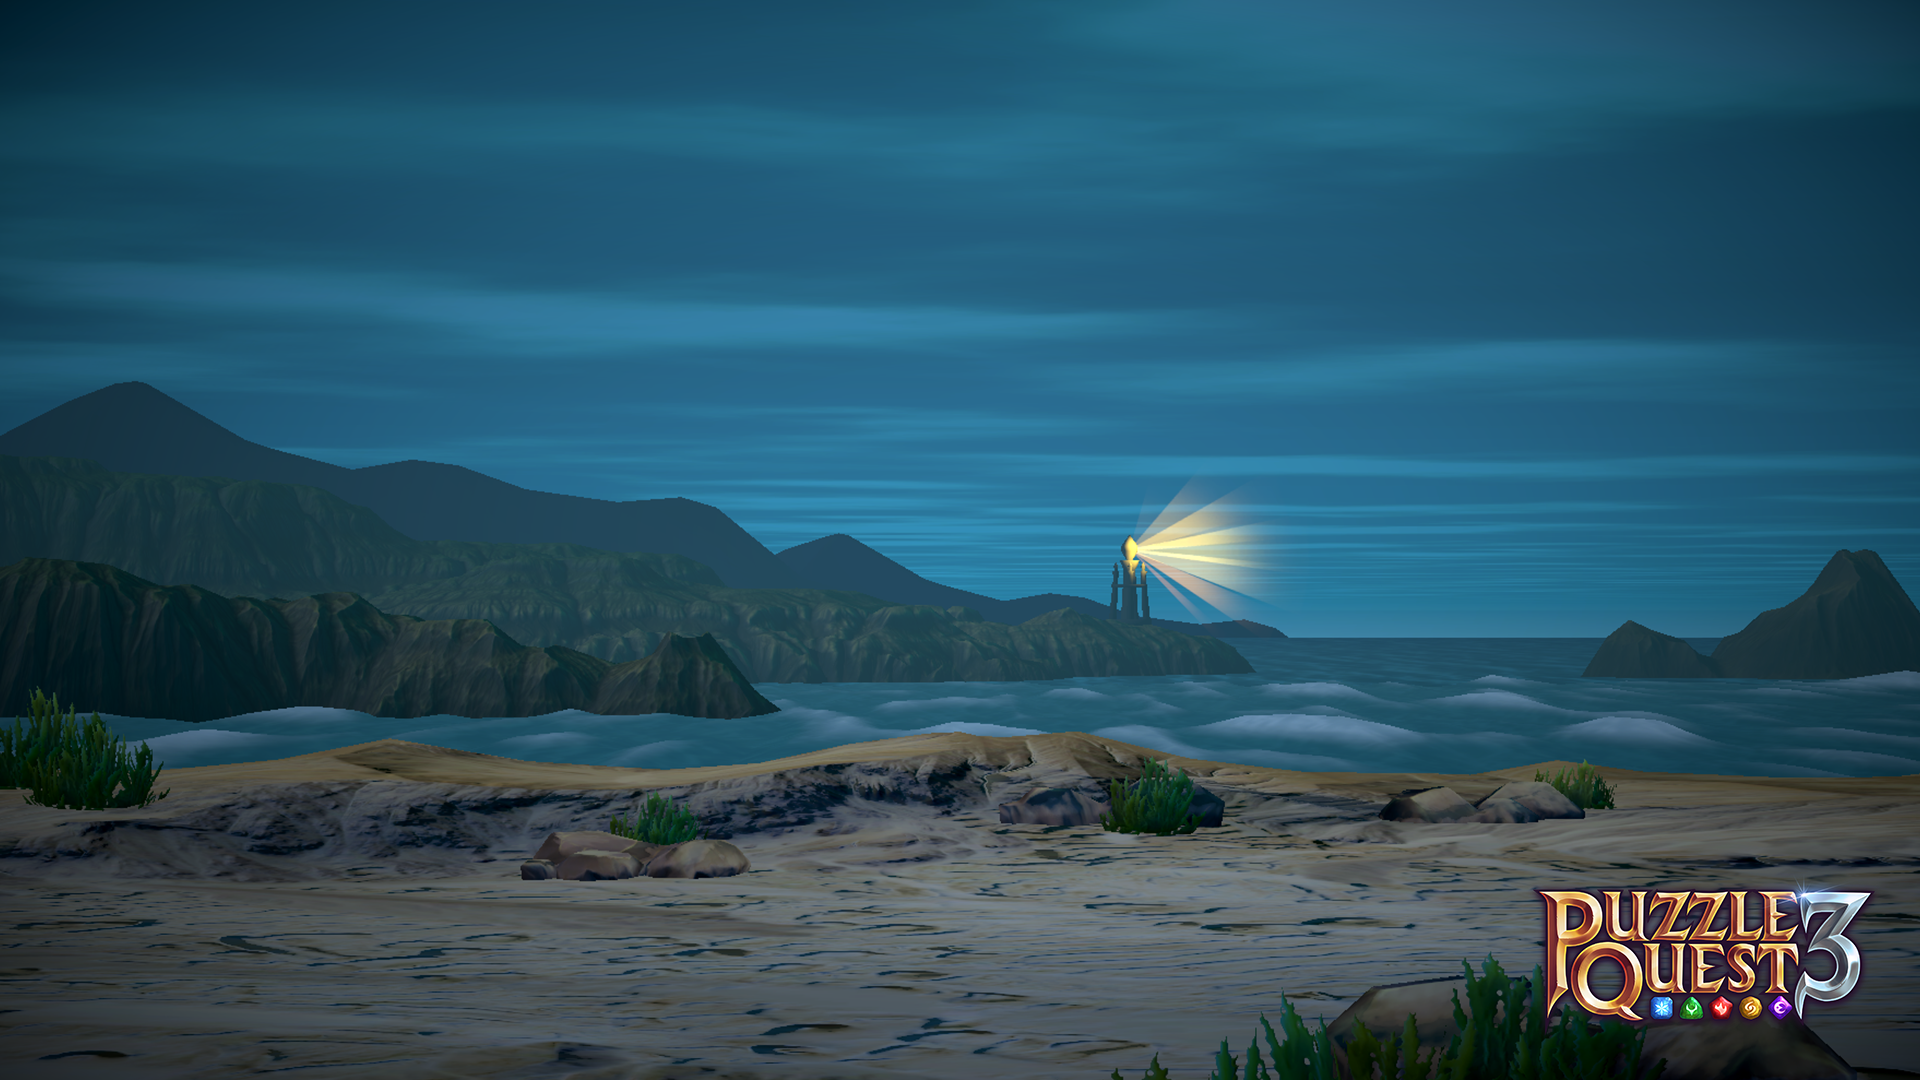 Icon for Lighthouse Keeper